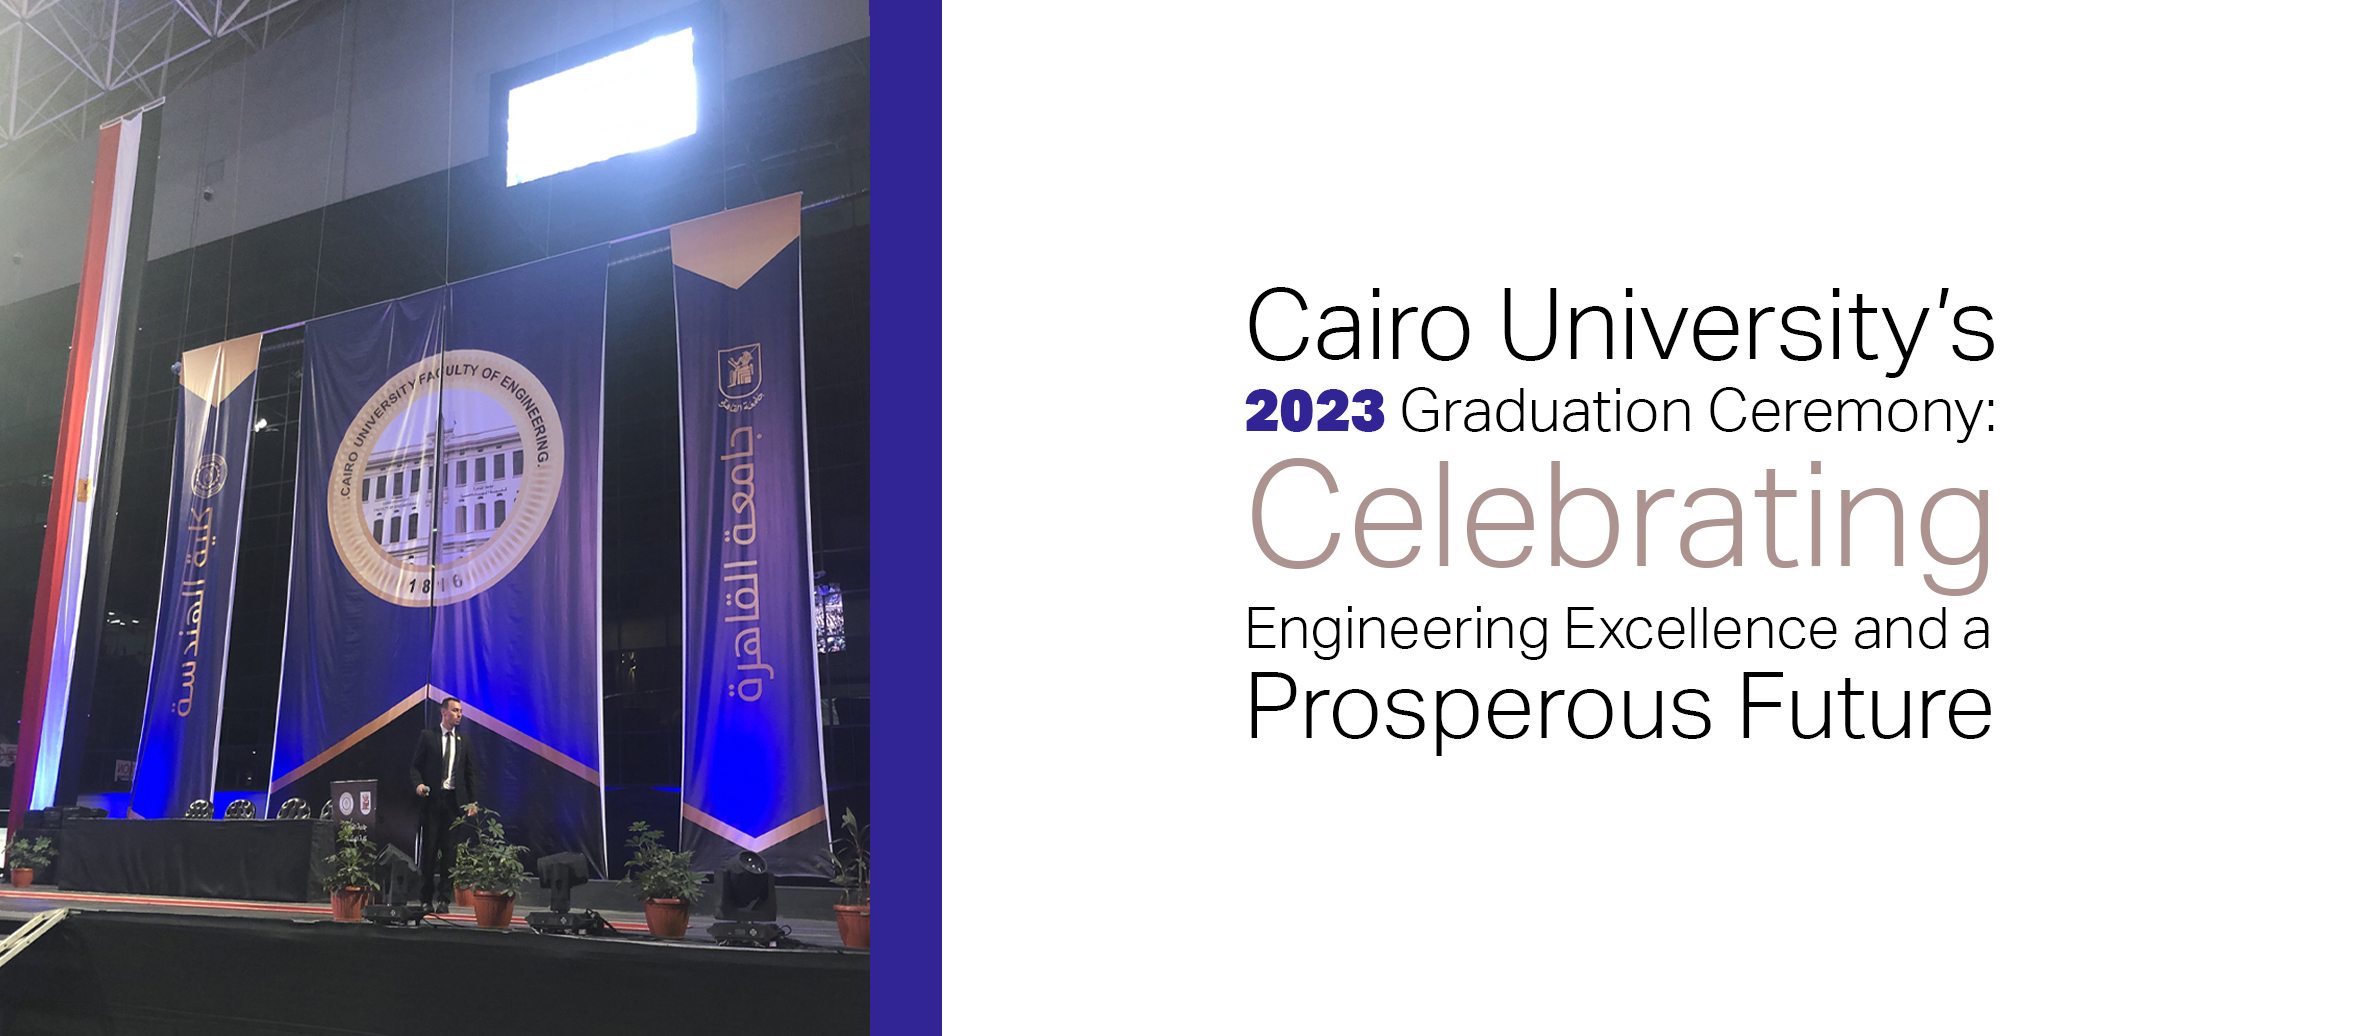 Cairo University’s 2023 Graduation Ceremony: Celebrating Engineering Excellence and a Prosperous Future 